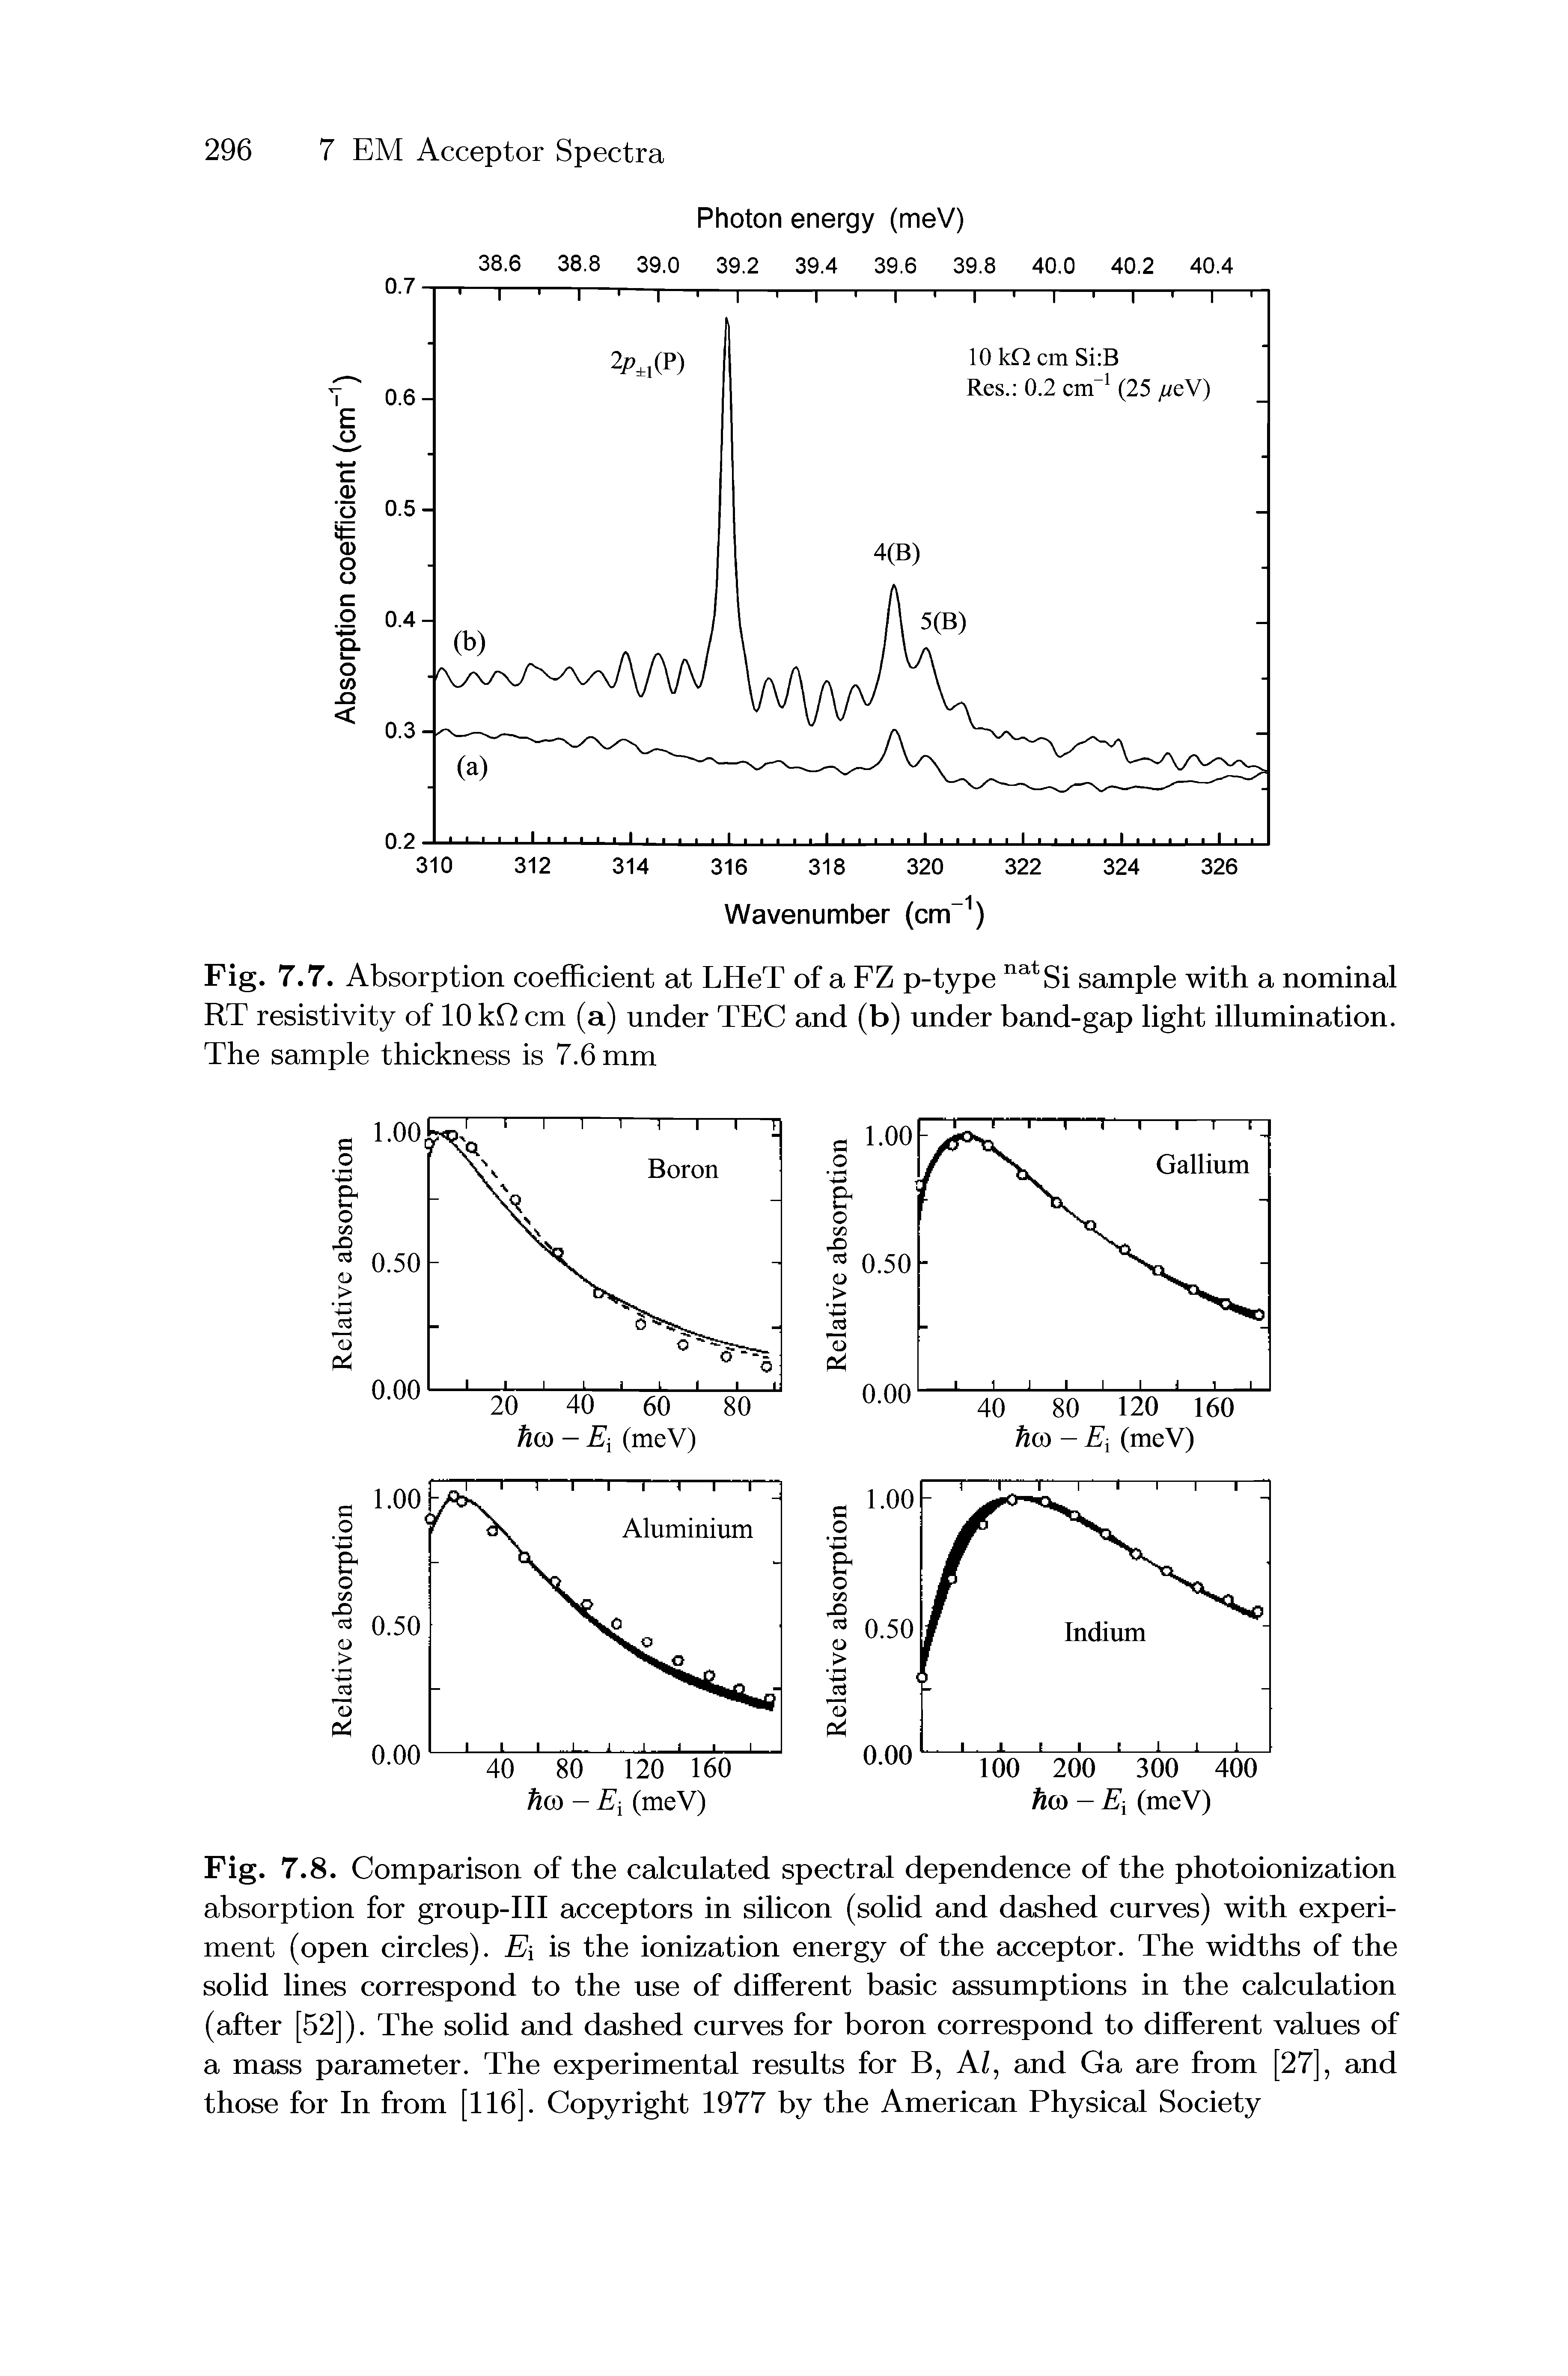 Fig. 7.8. Comparison of the calculated spectral dependence of the photoionization absorption for group-III acceptors in silicon (solid and dashed curves) with experiment (open circles). E is the ionization energy of the acceptor. The widths of the solid lines correspond to the use of different basic assumptions in the calculation (after [52]). The solid and dashed curves for boron correspond to different values of a mass parameter. The experimental results for B, AZ, and Ga are from [27], and those for In from [116]. Copyright 1977 by the American Physical Society...